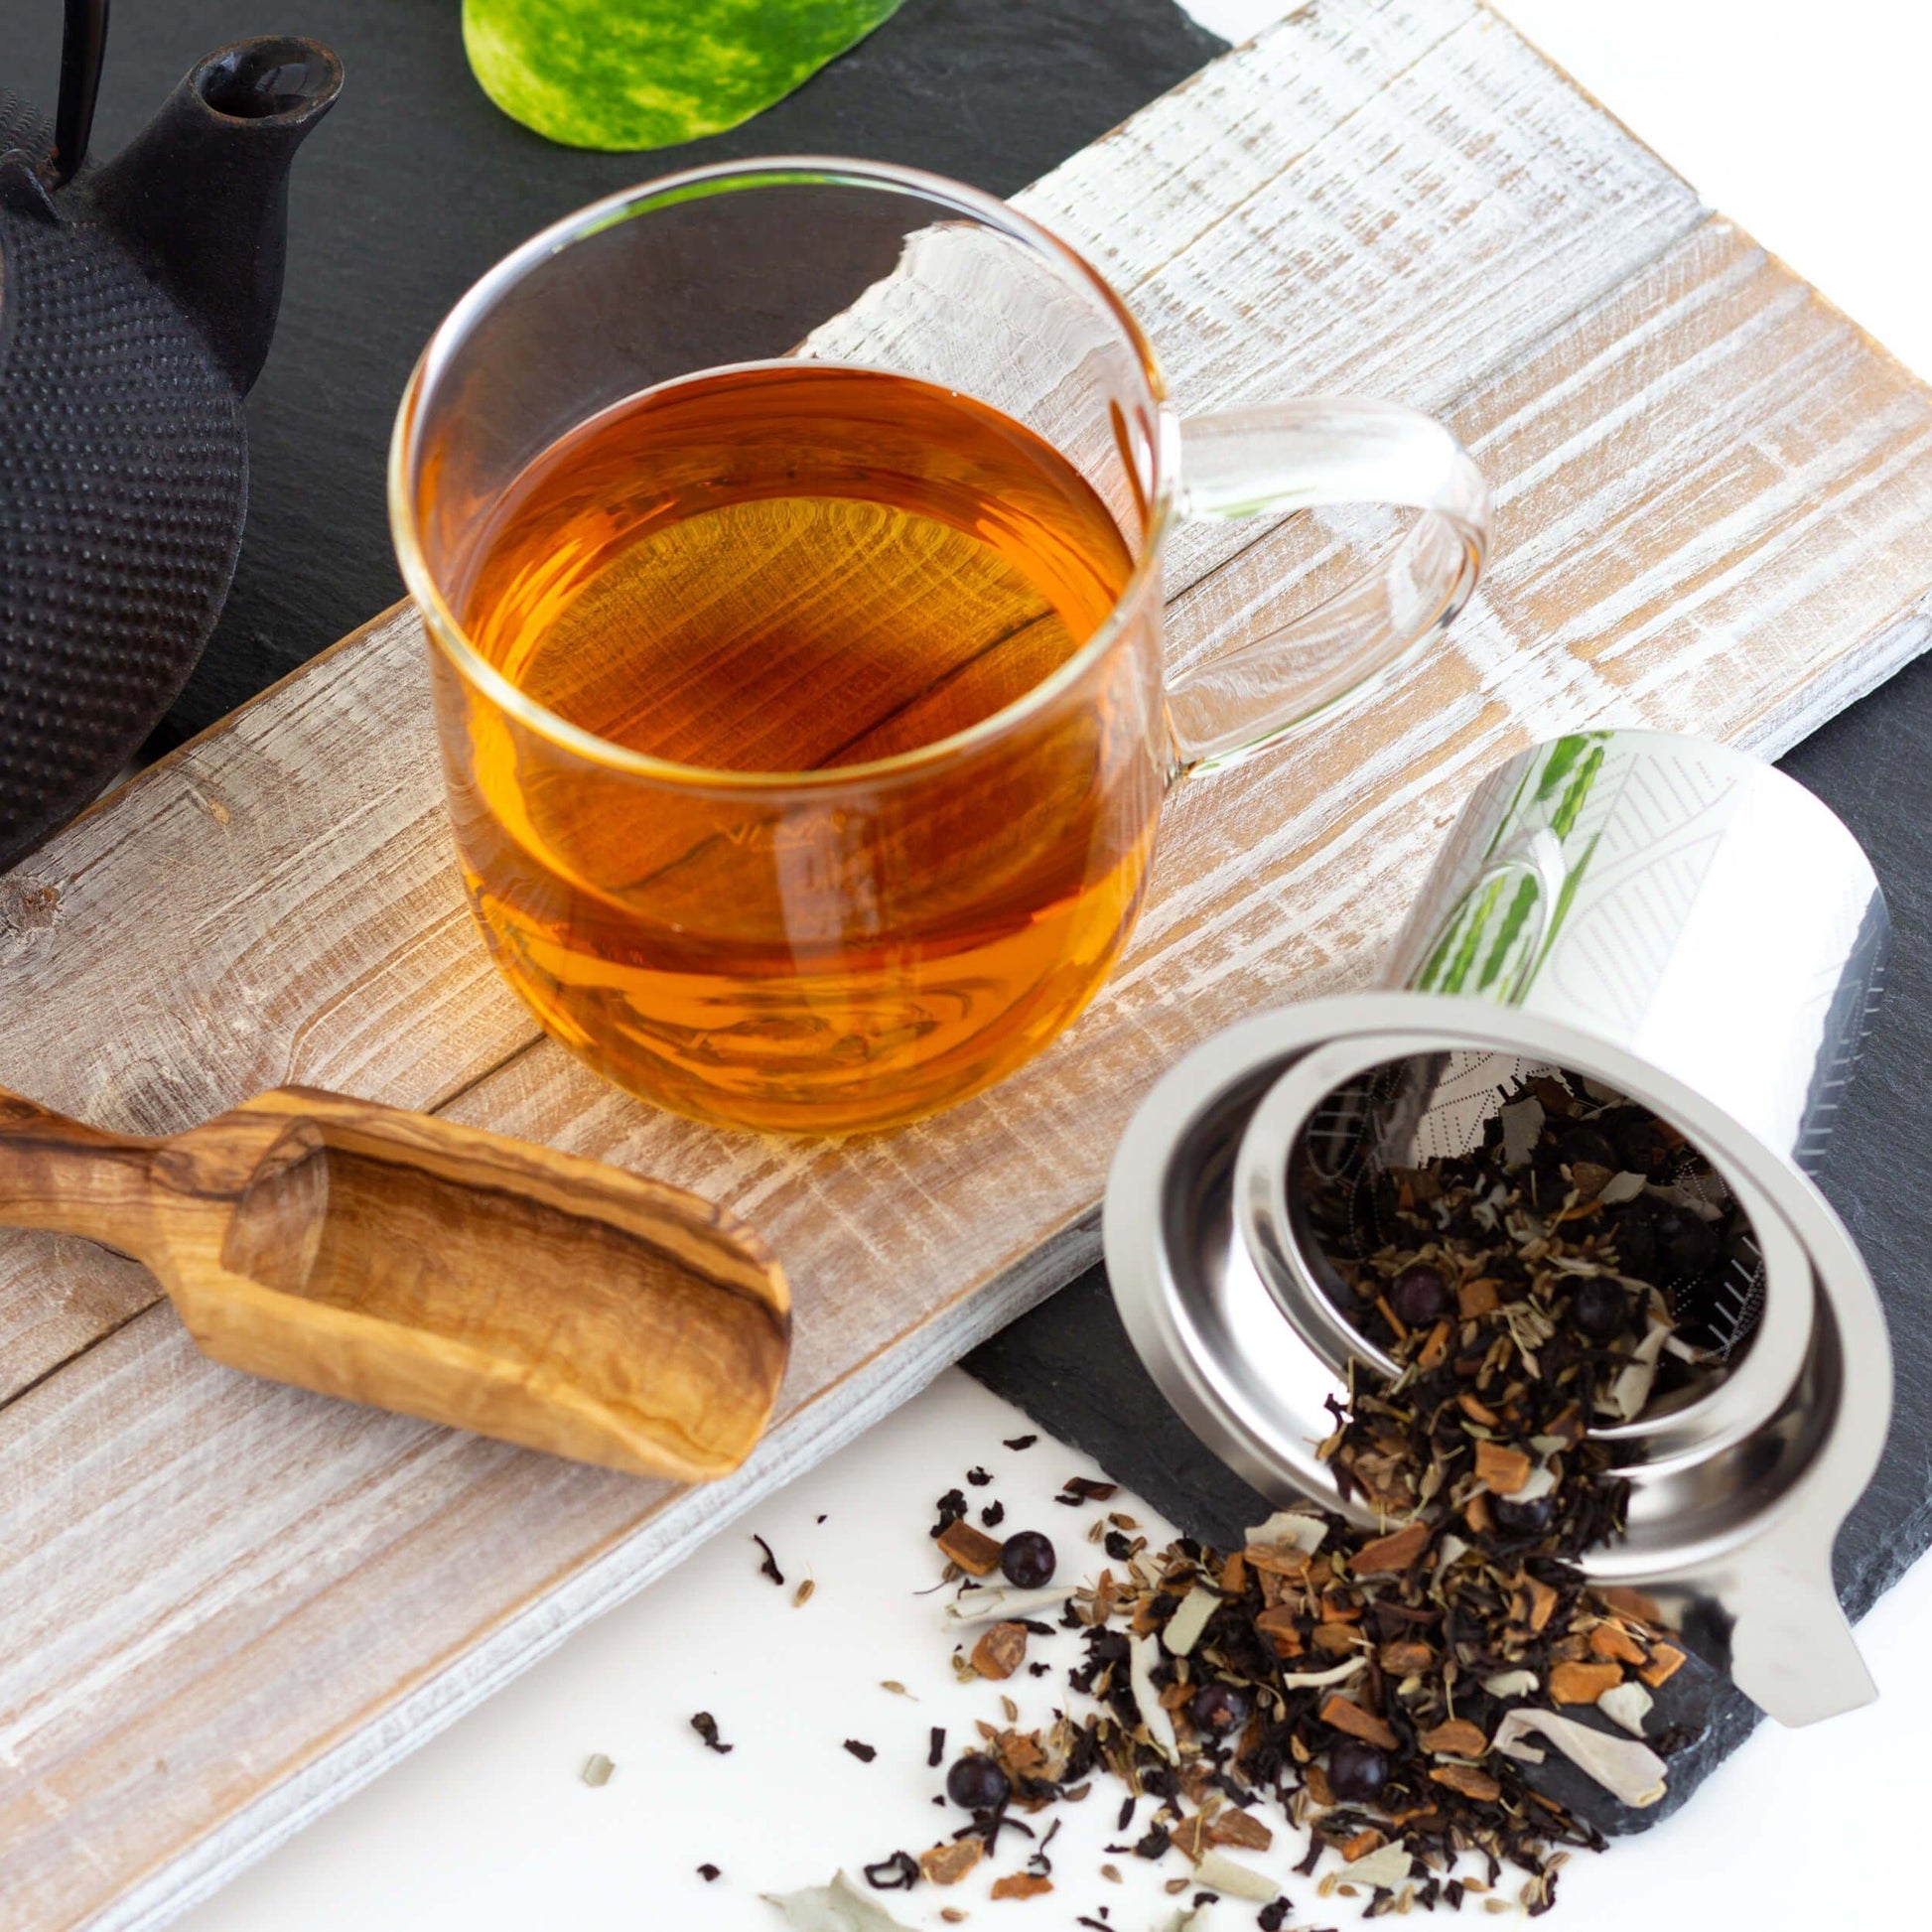 Santa Fe Sage Black Tea shown as brewed tea in a glass mug on a whitewashed wooden plank. A metal infuser is on its side with loose leaf tea spilling out, and a wooden scoop is nearby